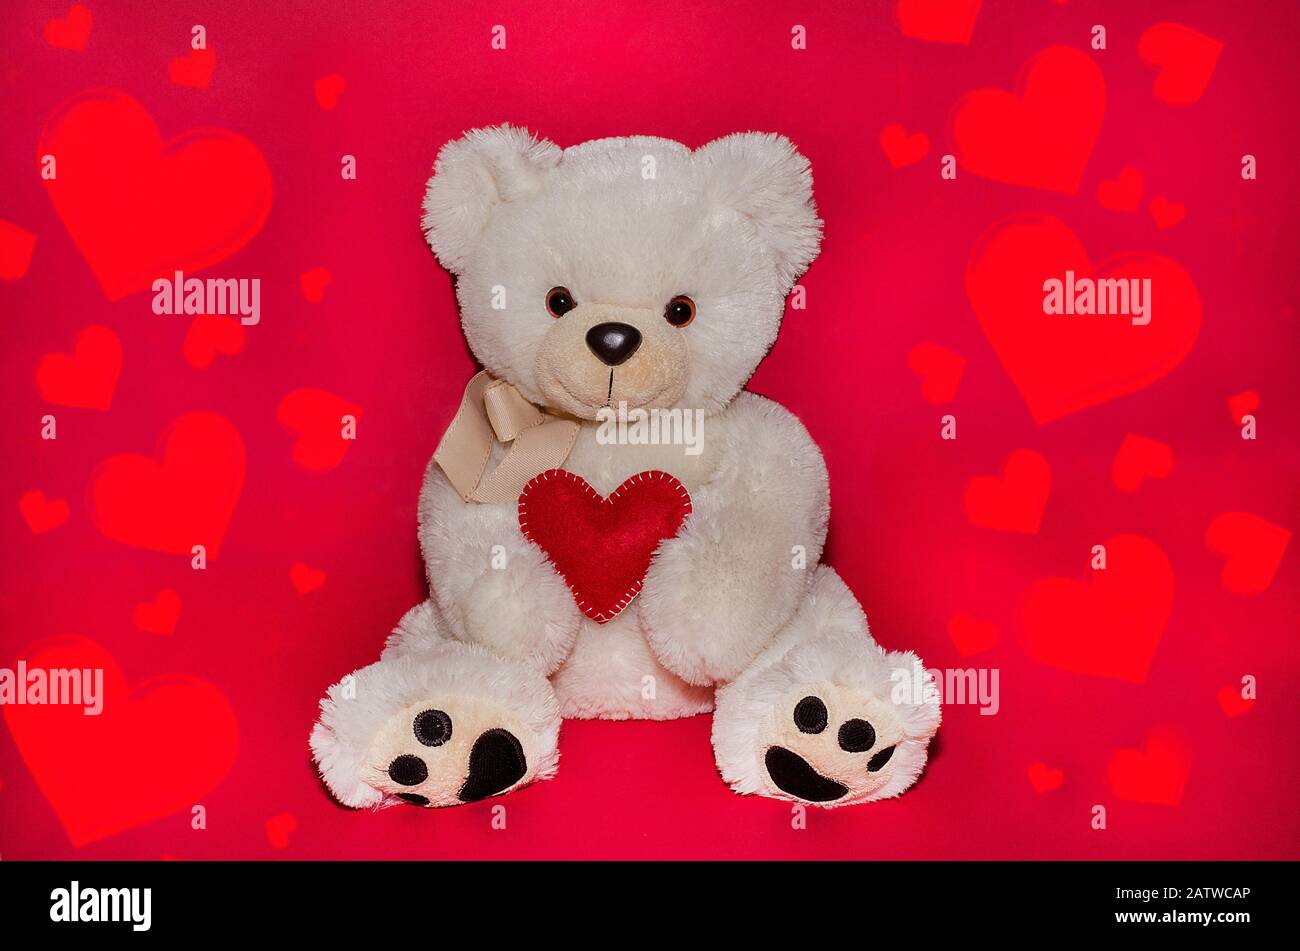 White teddy bear with a handmade heart on a red background with ...